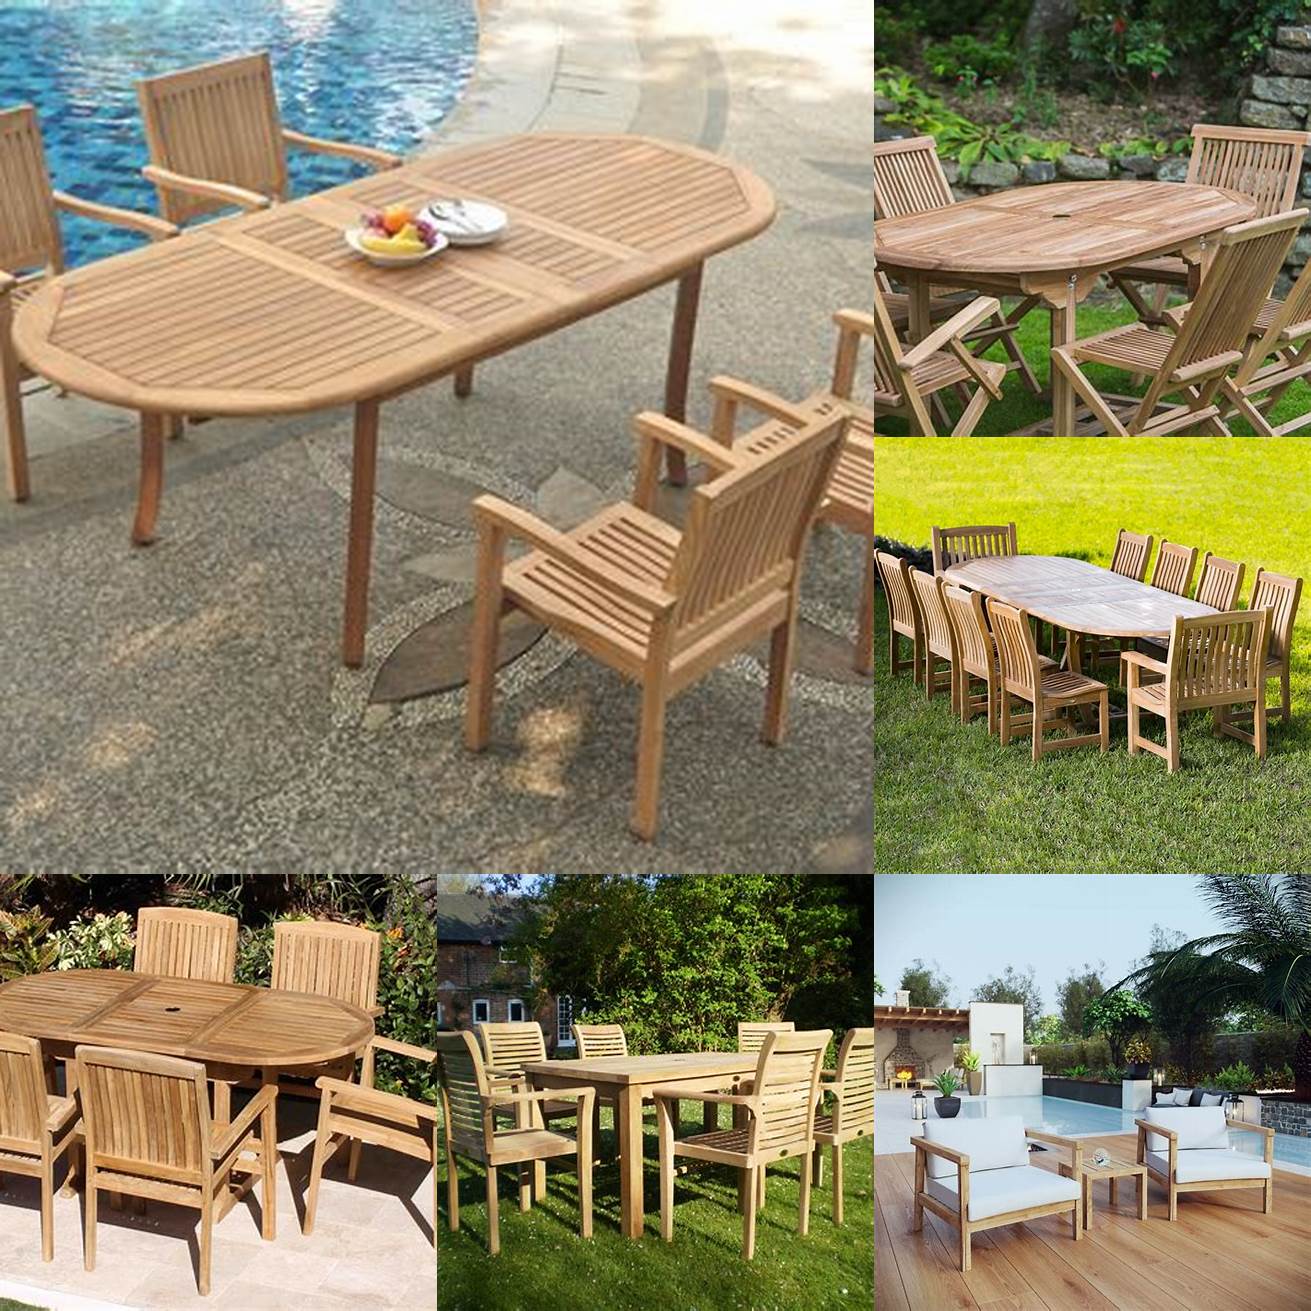 Picture of a person inspecting a teak garden furniture set